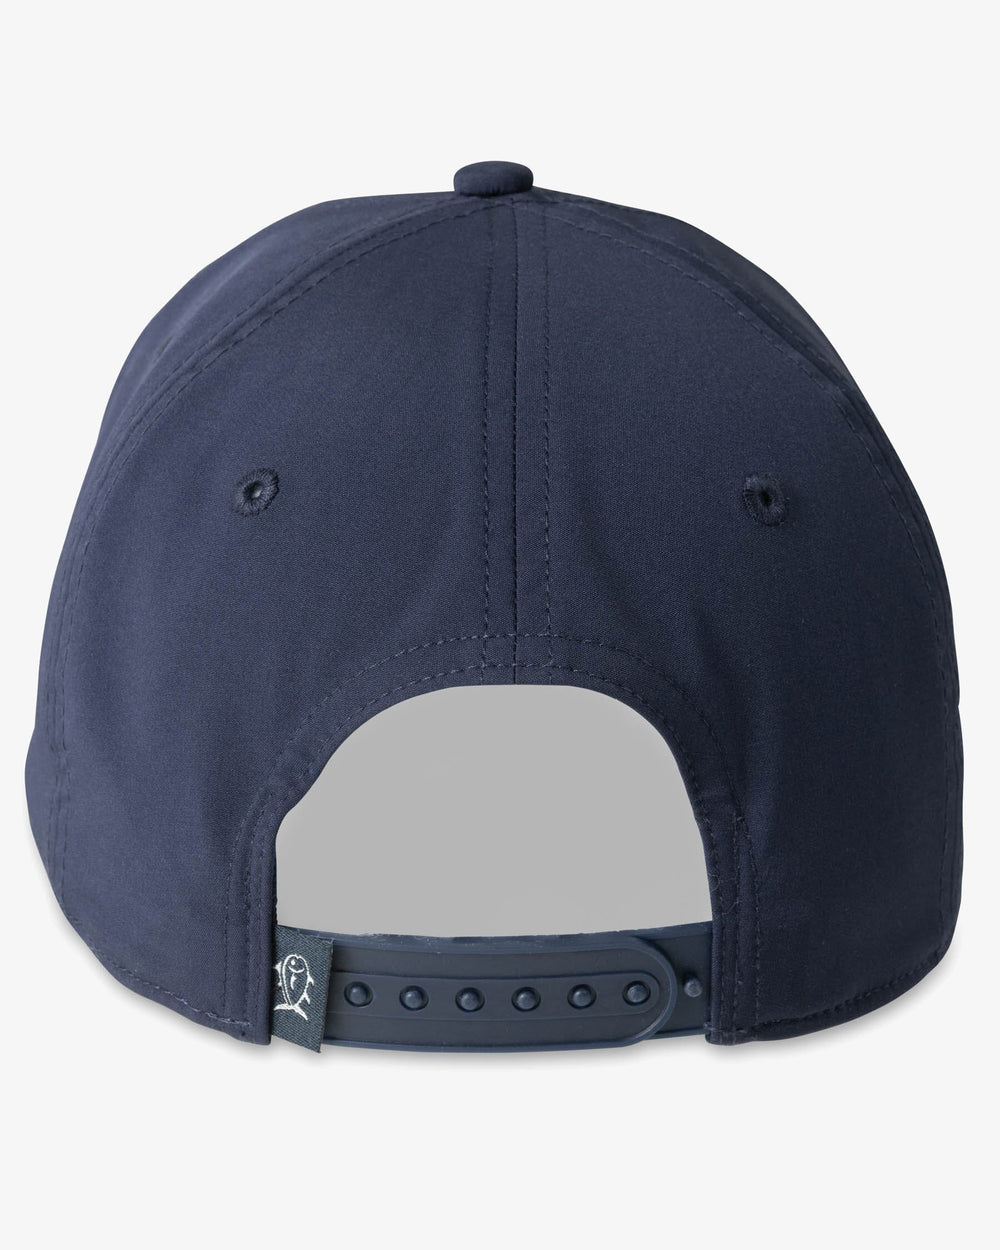 The back view of the Garrison Perforated Performance Hat by Southern Tide - Navy